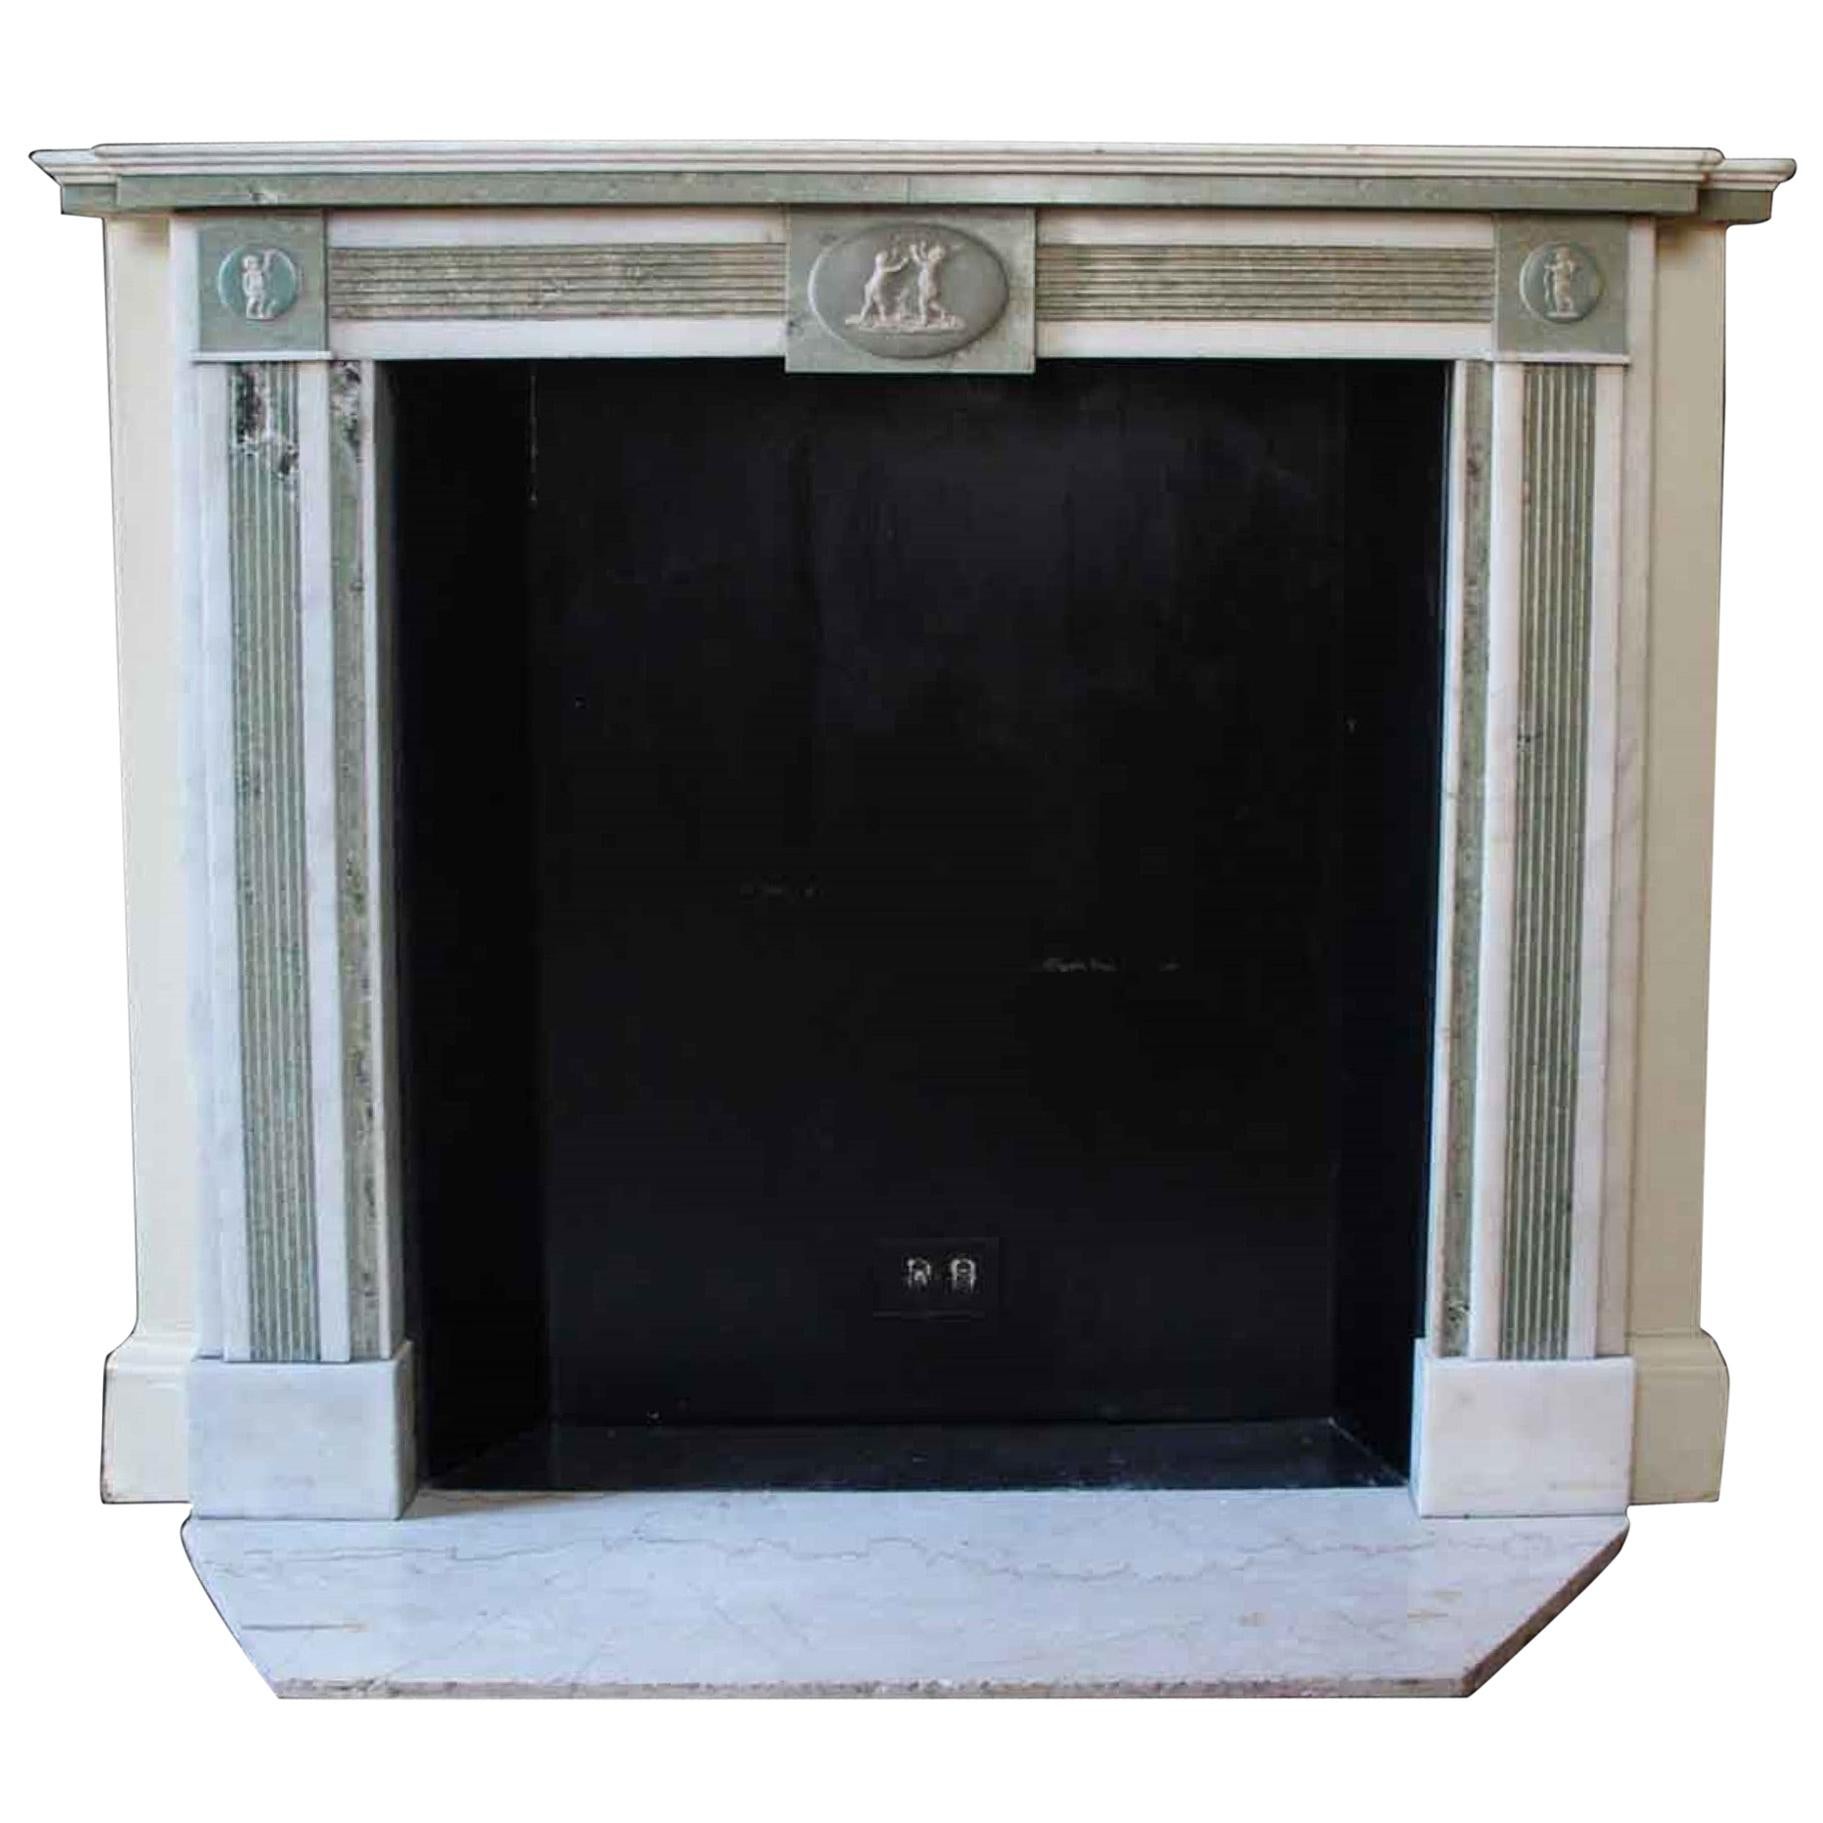 1800s NYC Waldorf Astoria Hotel Mantel White and Green Marble Regency Style